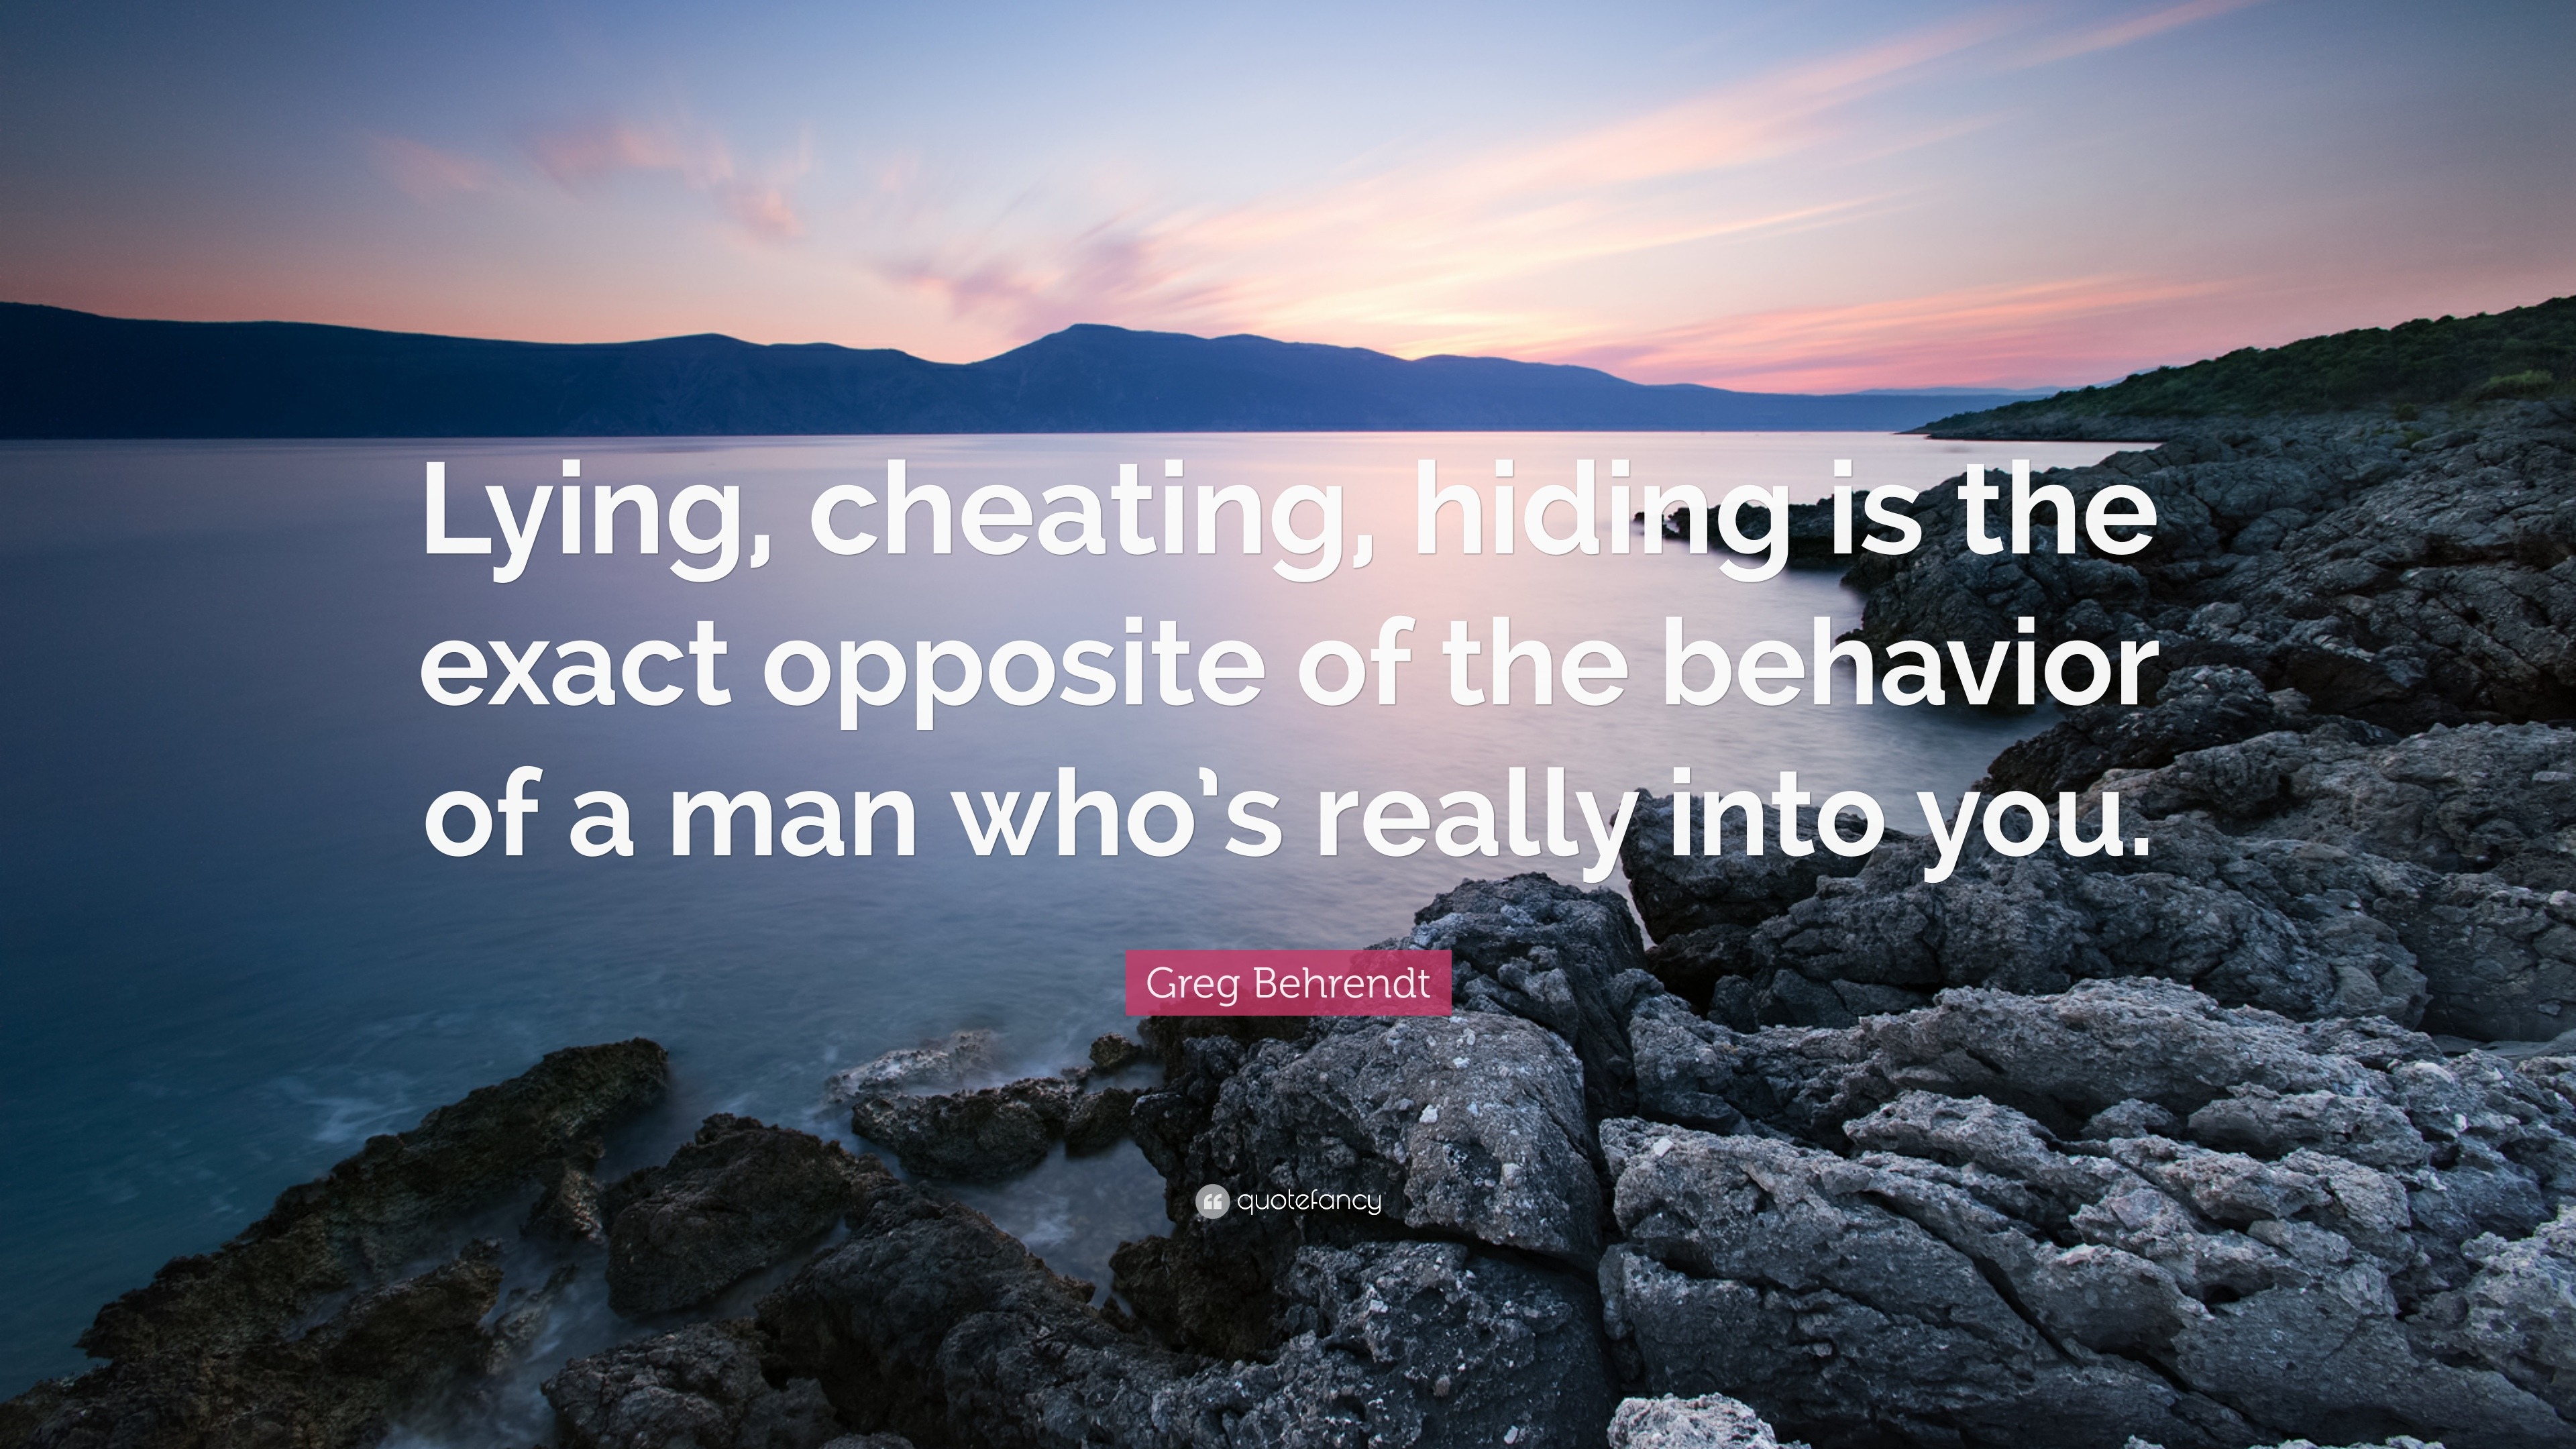 quotes about being cheated on and lied to